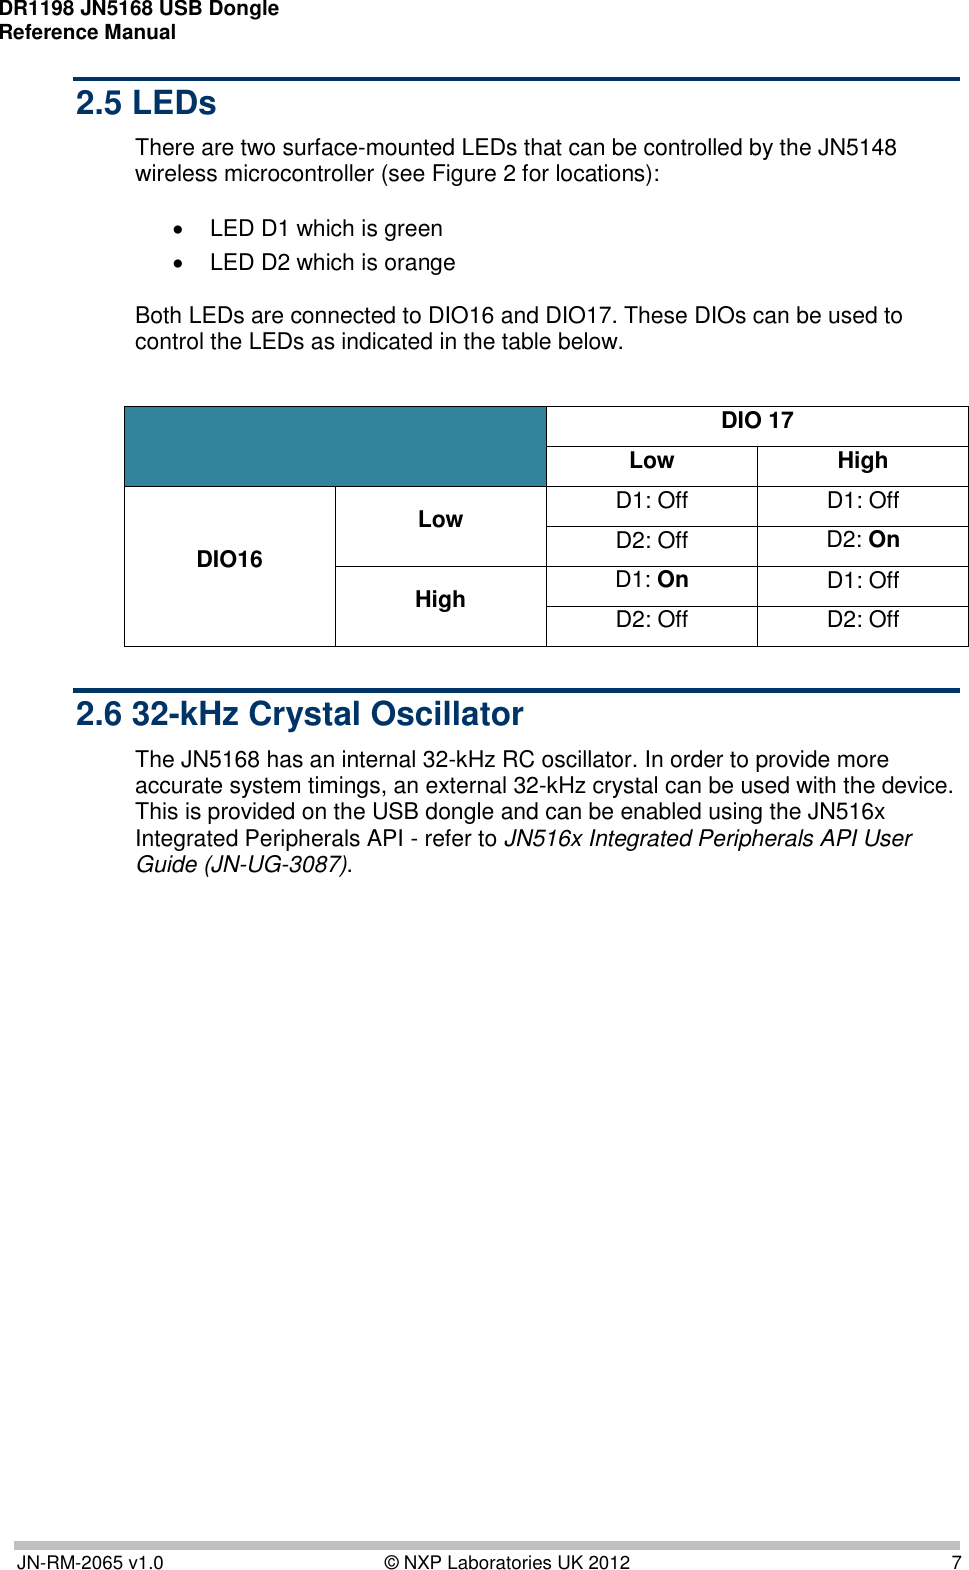 DR1198 JN5168 USB Dongle  Reference Manual       JN-RM-2065 v1.0  © NXP Laboratories UK 2012  7 2.5 LEDs There are two surface-mounted LEDs that can be controlled by the JN5148 wireless microcontroller (see Figure 2 for locations):     LED D1 which is green    LED D2 which is orange   Both LEDs are connected to DIO16 and DIO17. These DIOs can be used to control the LEDs as indicated in the table below.   DIO 17 Low High DIO16 Low D1: Off D1: Off D2: Off D2: On High D1: On D1: Off D2: Off D2: Off 2.6 32-kHz Crystal Oscillator The JN5168 has an internal 32-kHz RC oscillator. In order to provide more accurate system timings, an external 32-kHz crystal can be used with the device. This is provided on the USB dongle and can be enabled using the JN516x Integrated Peripherals API - refer to JN516x Integrated Peripherals API User Guide (JN-UG-3087). 